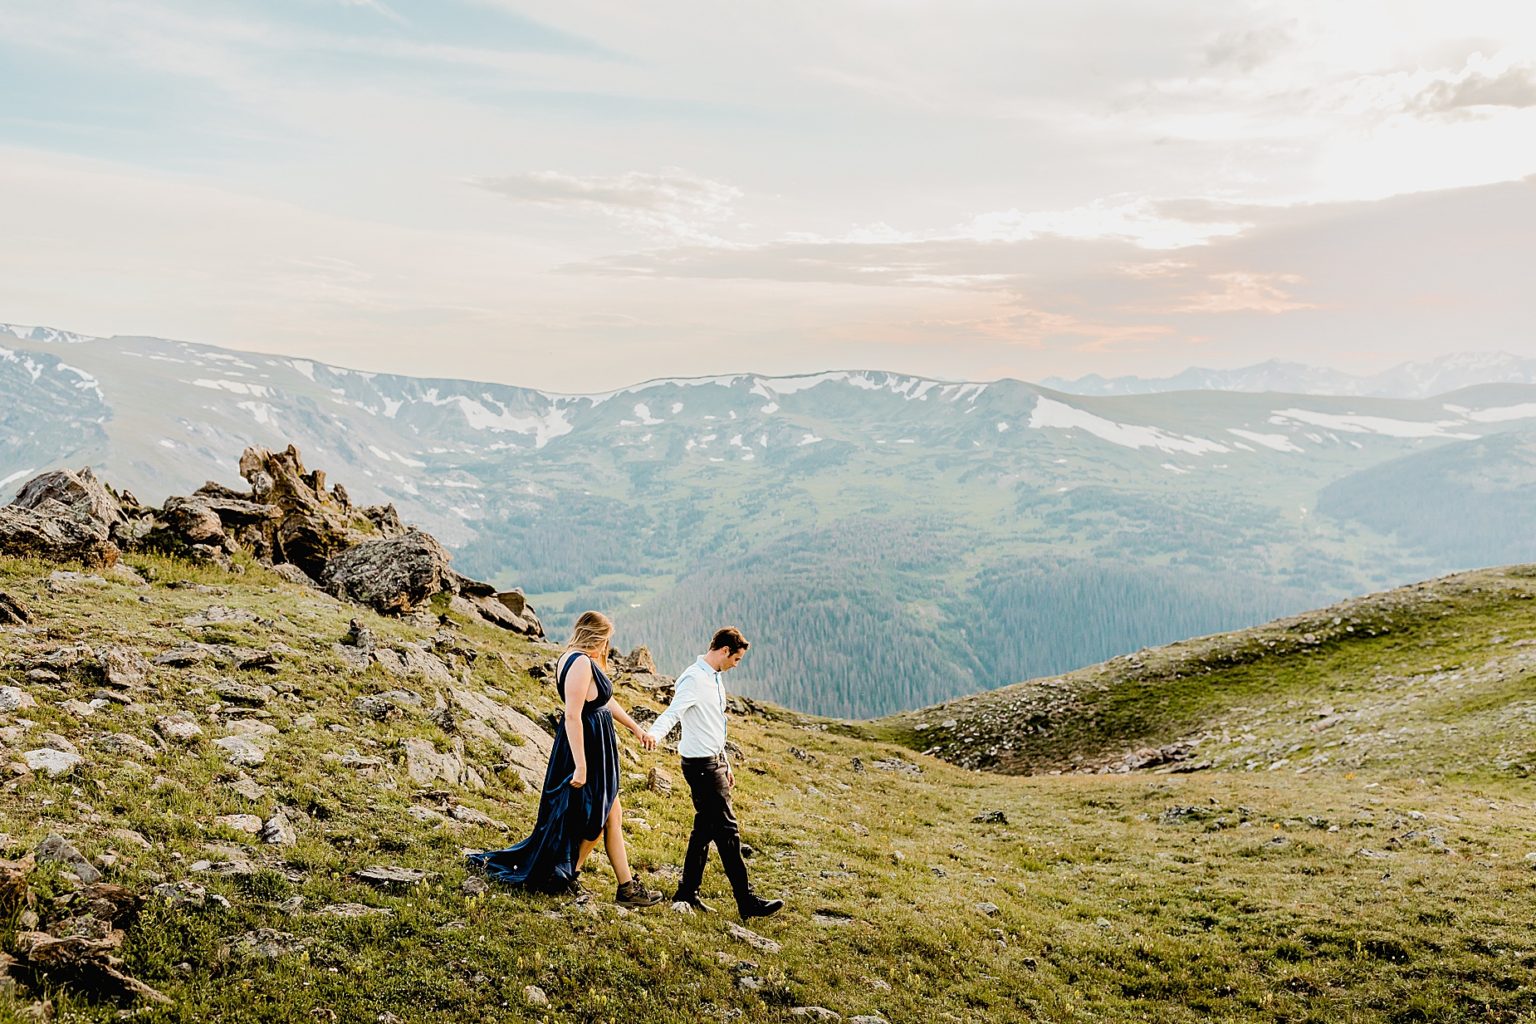 couple hiking down mountain together in their nice attire and hiking shoes with gorgeous mountain backdrop